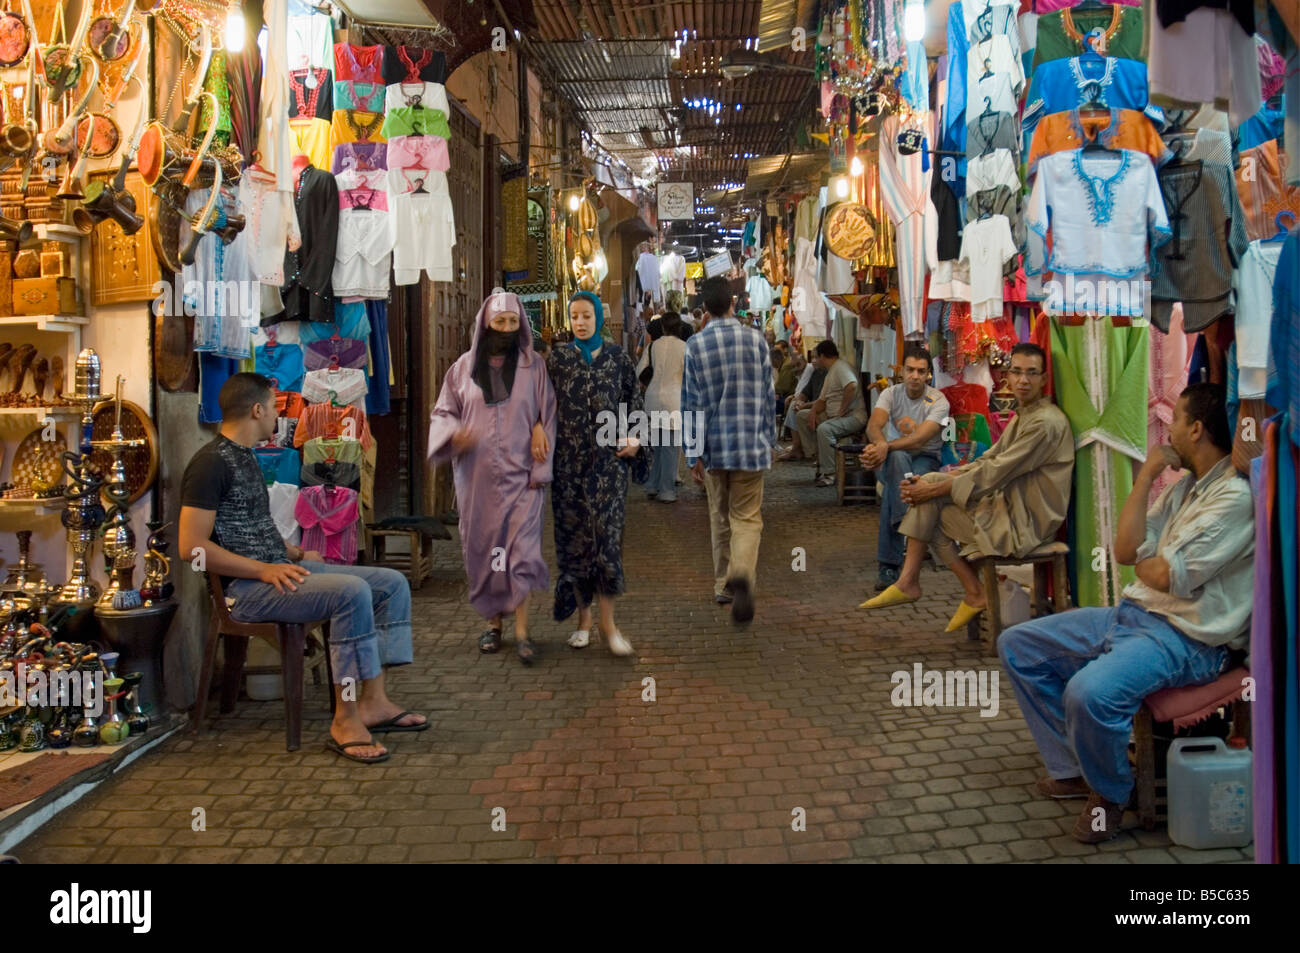 A view of local people shopping in the narrow streets of the souk area in Marrakesh. Stock Photo